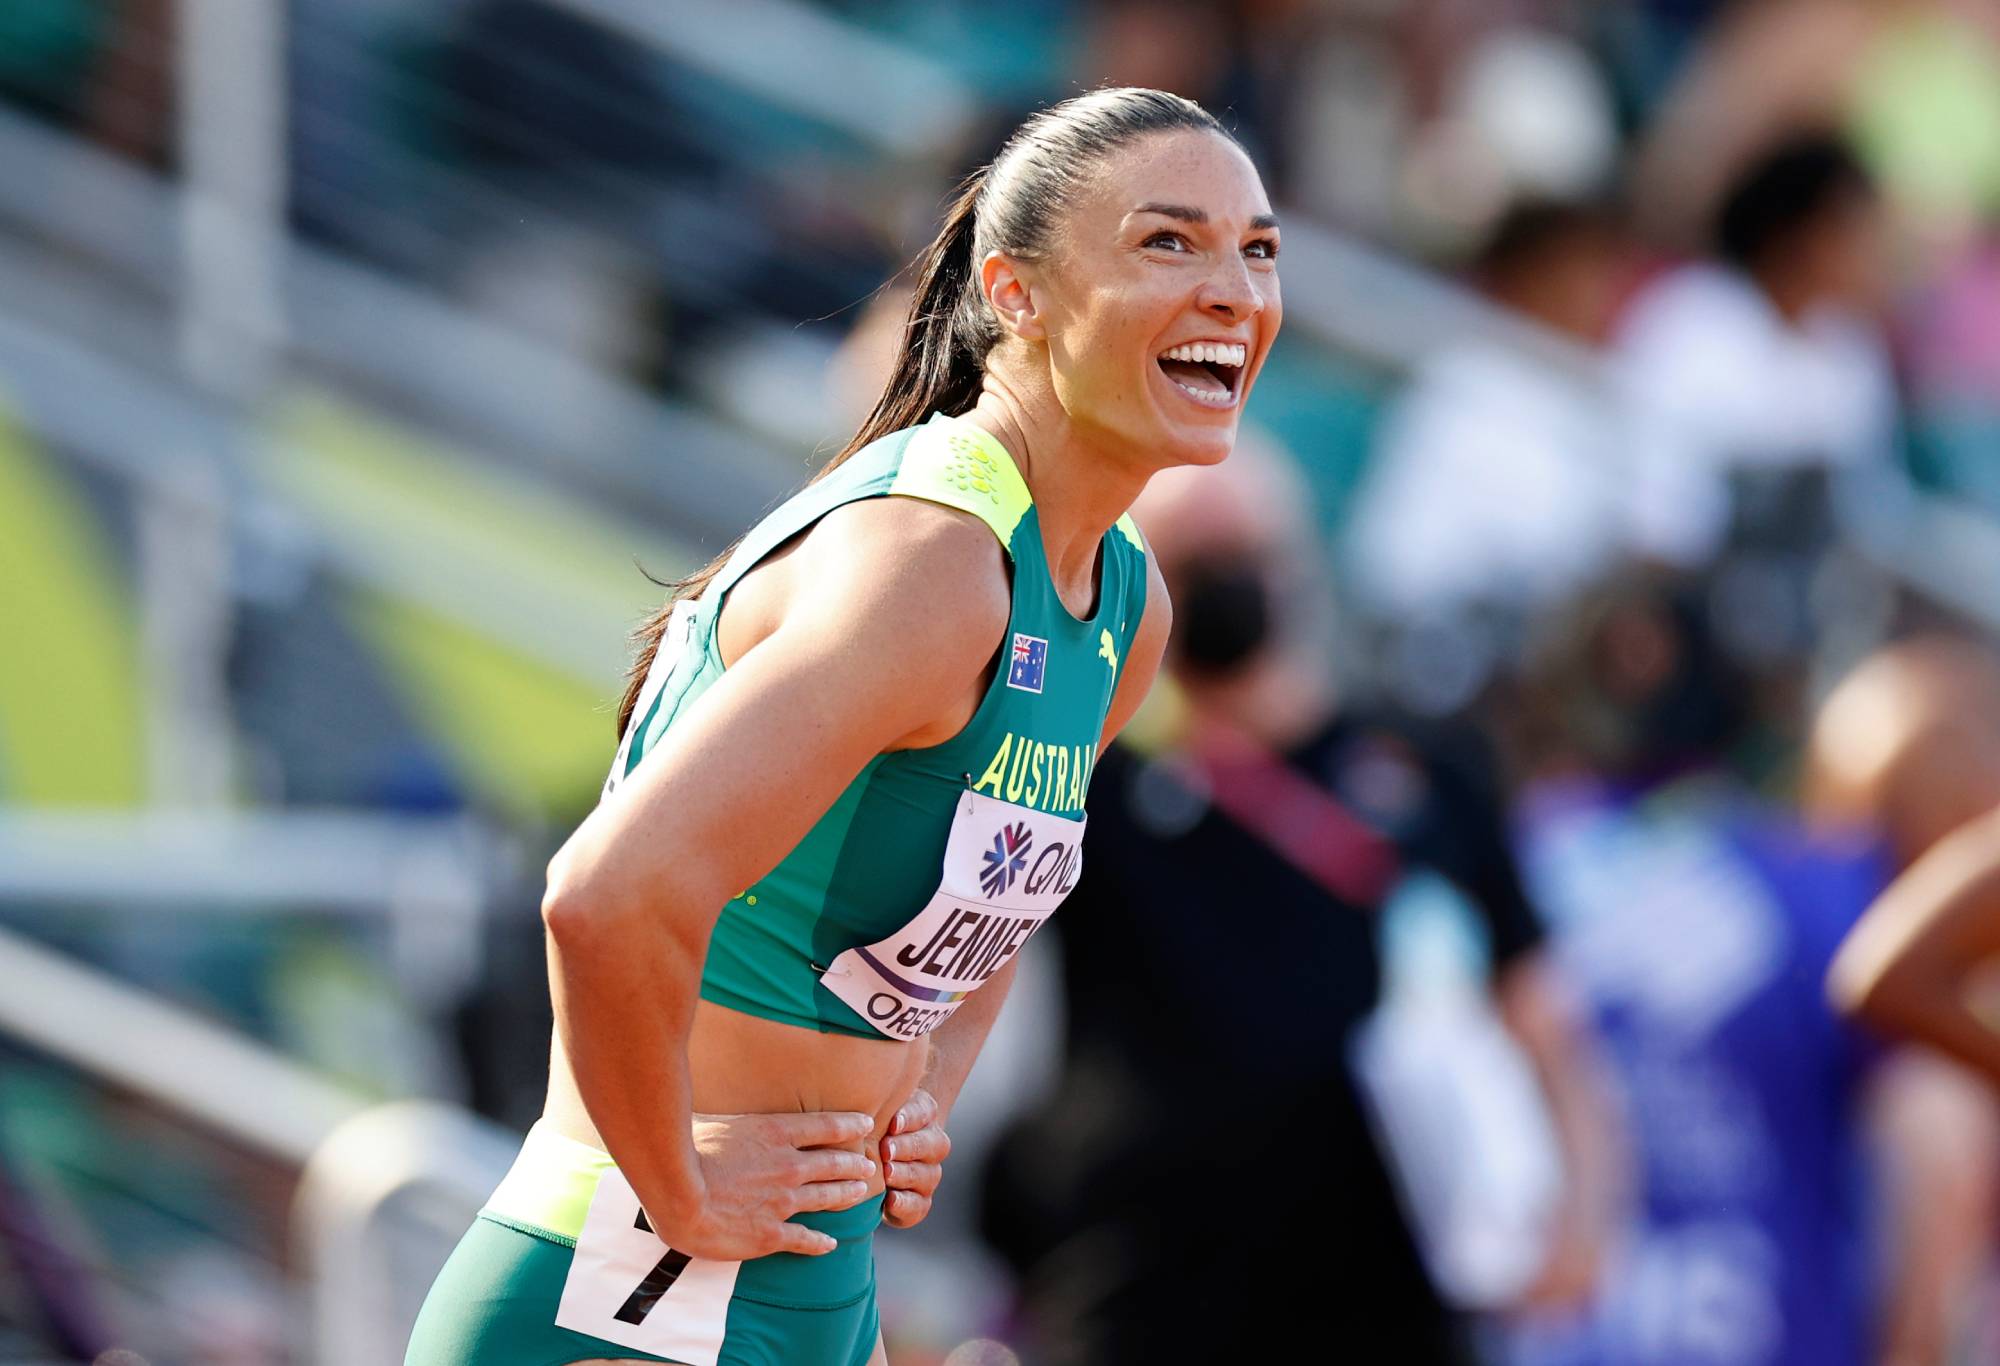 Michelle Jenneke of Team Australia reacts after competing in the Women's 100m Hurdles Semi-Final on day ten of the World Athletics Championships Oregon22 at Hayward Field on July 24, 2022 in Eugene, Oregon. (Photo by Steph Chambers/Getty Images)